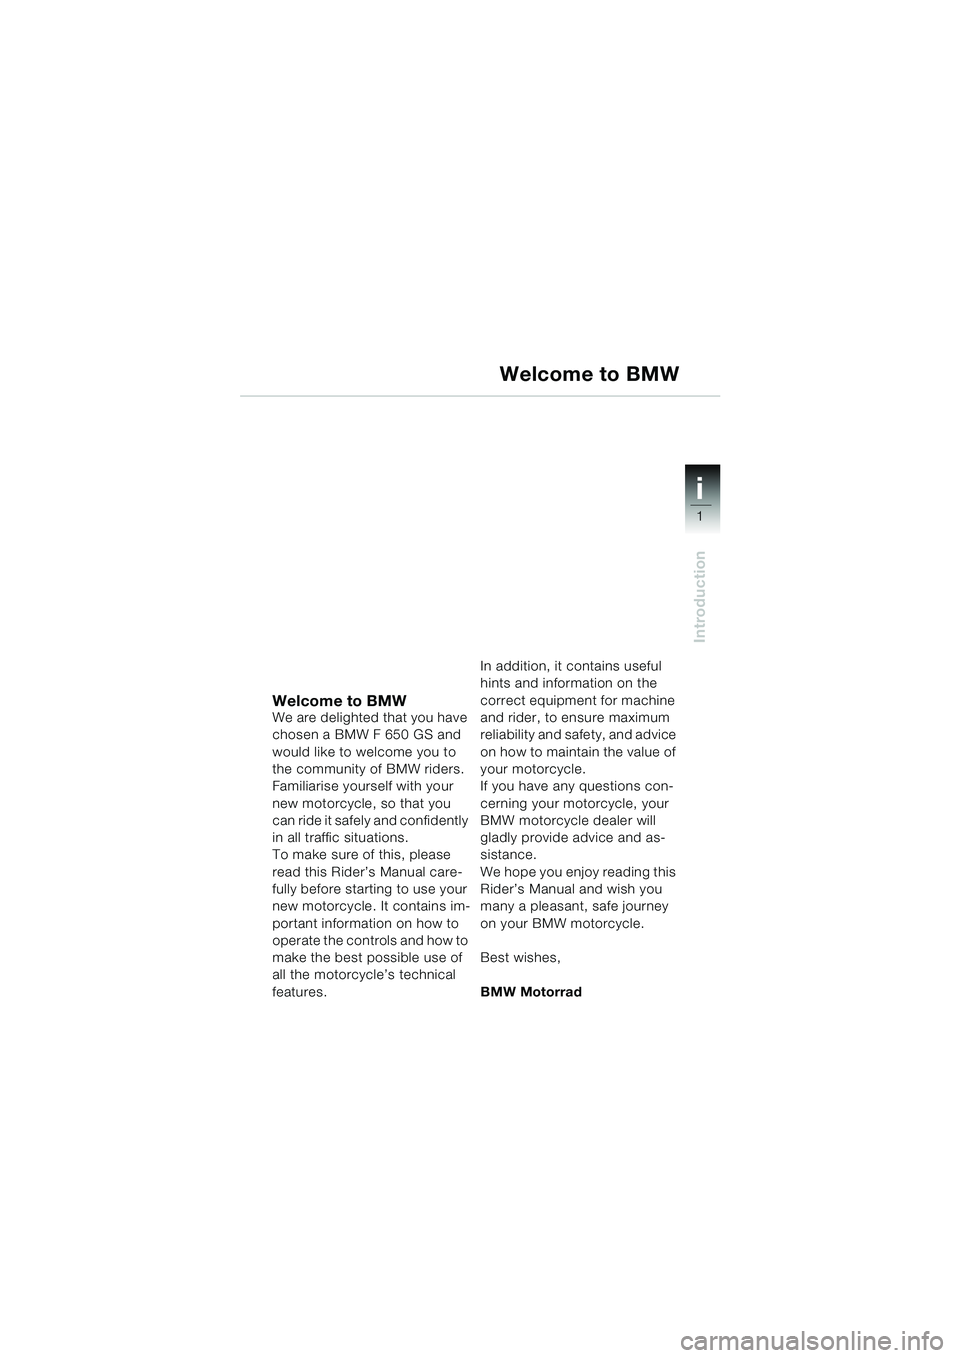 BMW MOTORRAD F 650 GS 2003  Riders Manual (in English) 1
Introduction
i
Welcome to BMWWe are delighted that you have 
chosen a BMW F 650 GS and 
would like to welcome you to 
the community of BMW riders.
Familiarise yourself with your 
new motorcycle, so 